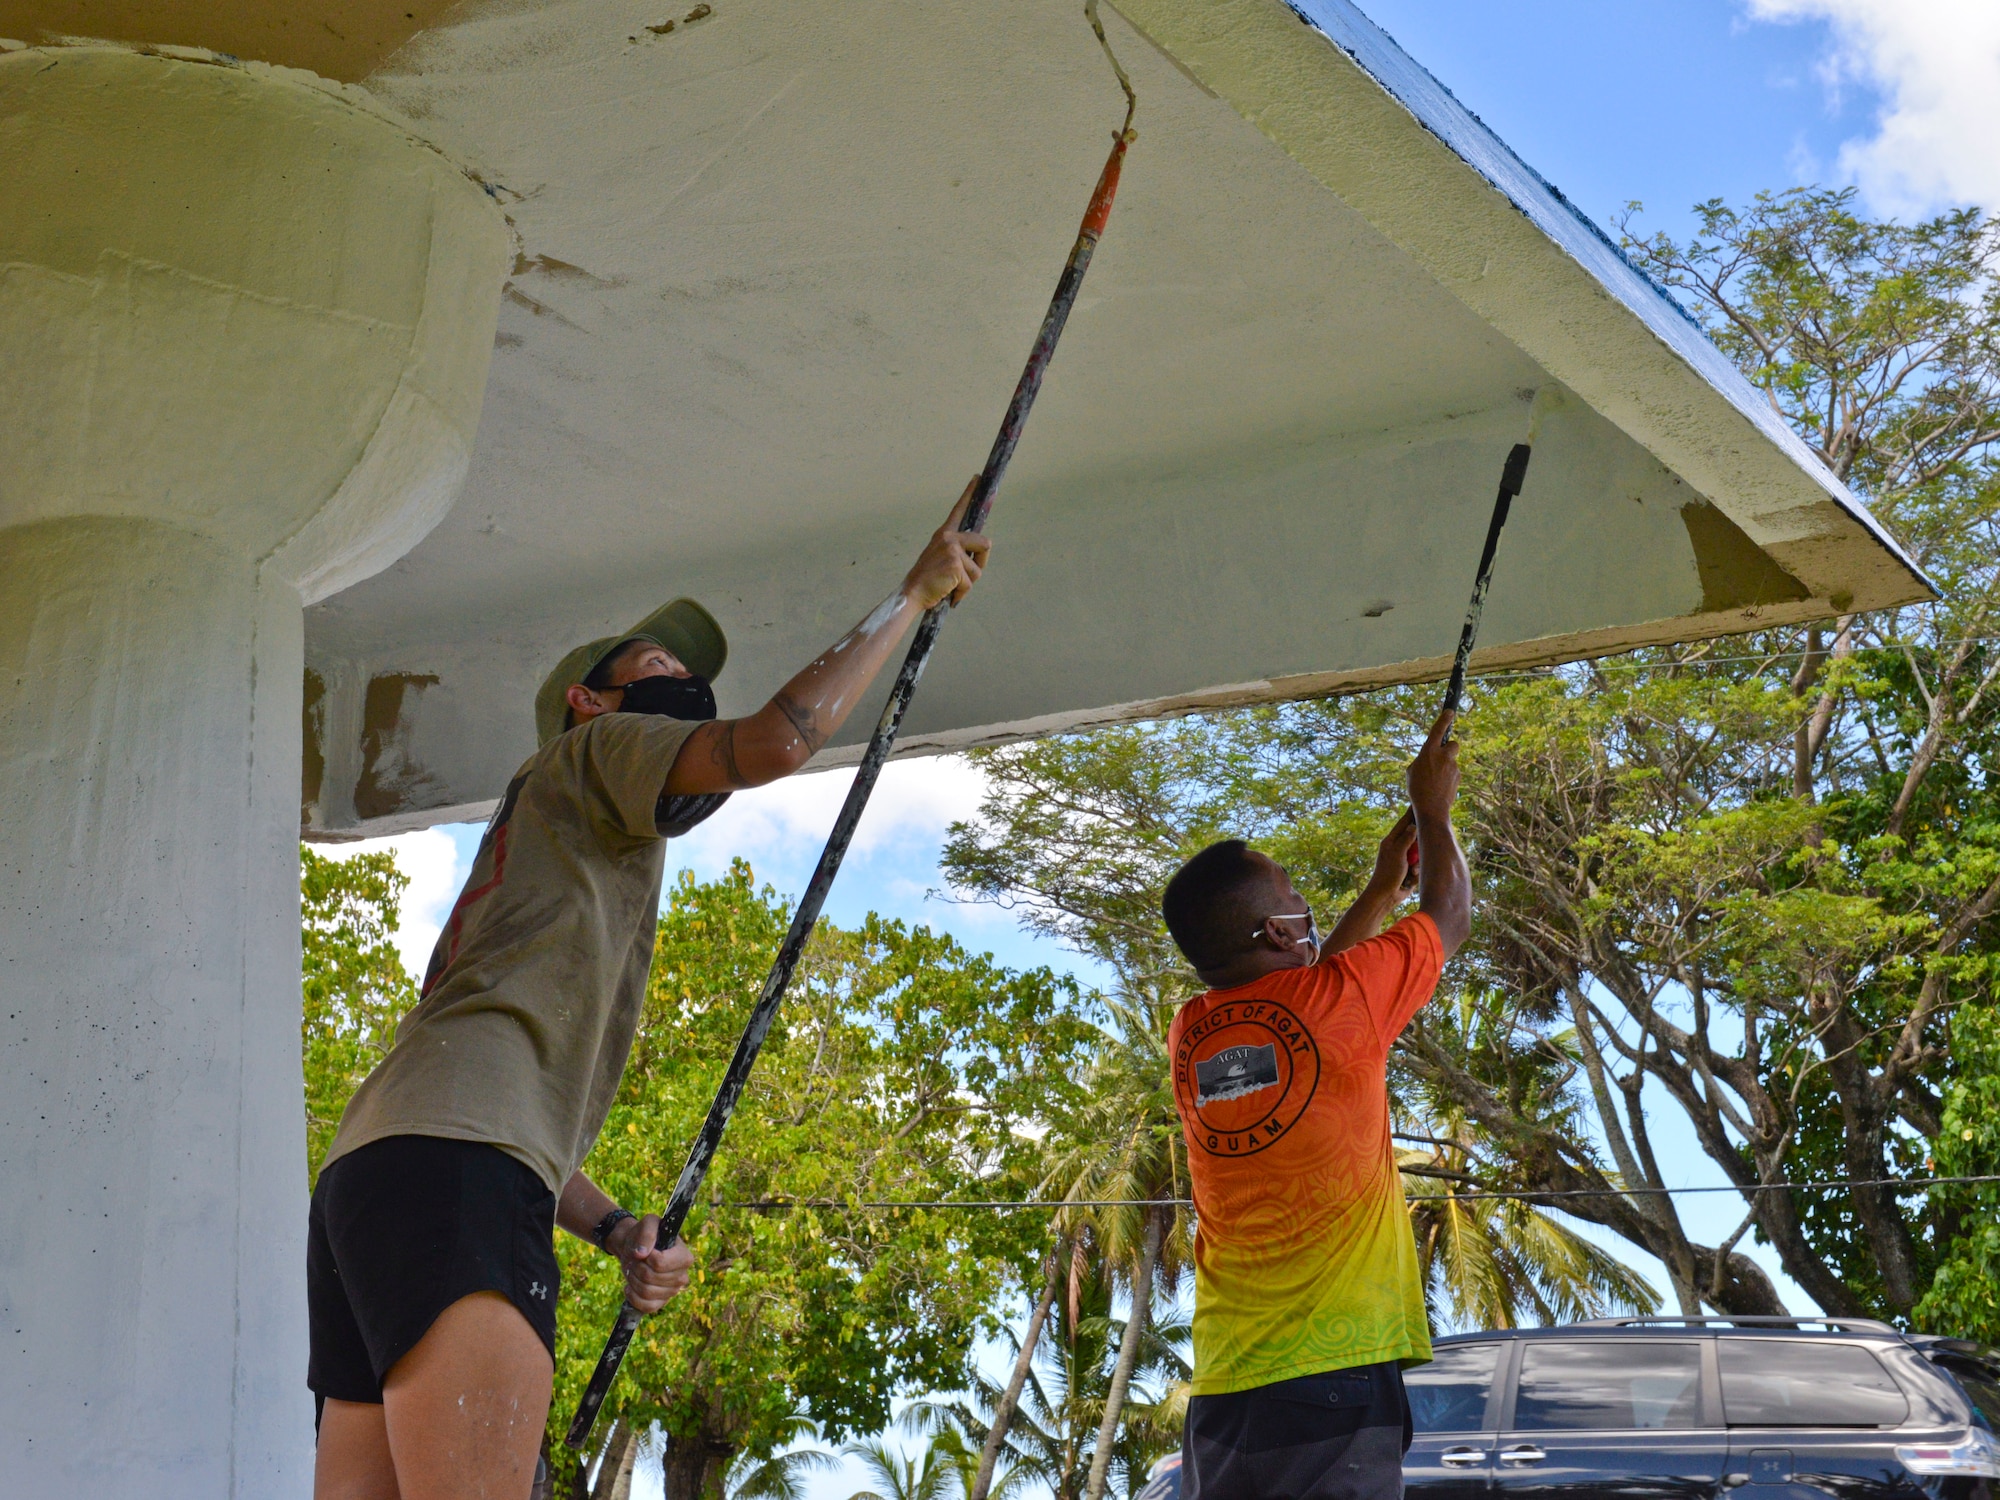 U.S. Air Force Staff Sgt. Kelly Lawson, 36th Healthcare Operations Squadron noncommissioned officer in charge of in-garrison maintenance, and Clide Torres, an Agat Mayor’s Office maintenance worker, paint a bus stop in Agat, Guam, March 20, 2021. Nearly a dozen 36th HCOS Airmen and family members joined Agat Mayor’s Office staff to repaint two village bus stops through the Andersen Air Force Base Sister Village Sister Squadron program, in which squadron volunteers collaborate in events with Guam residents to strengthen their friendship and partnership. (U.S. Air Force photo by Alana Chargualaf)